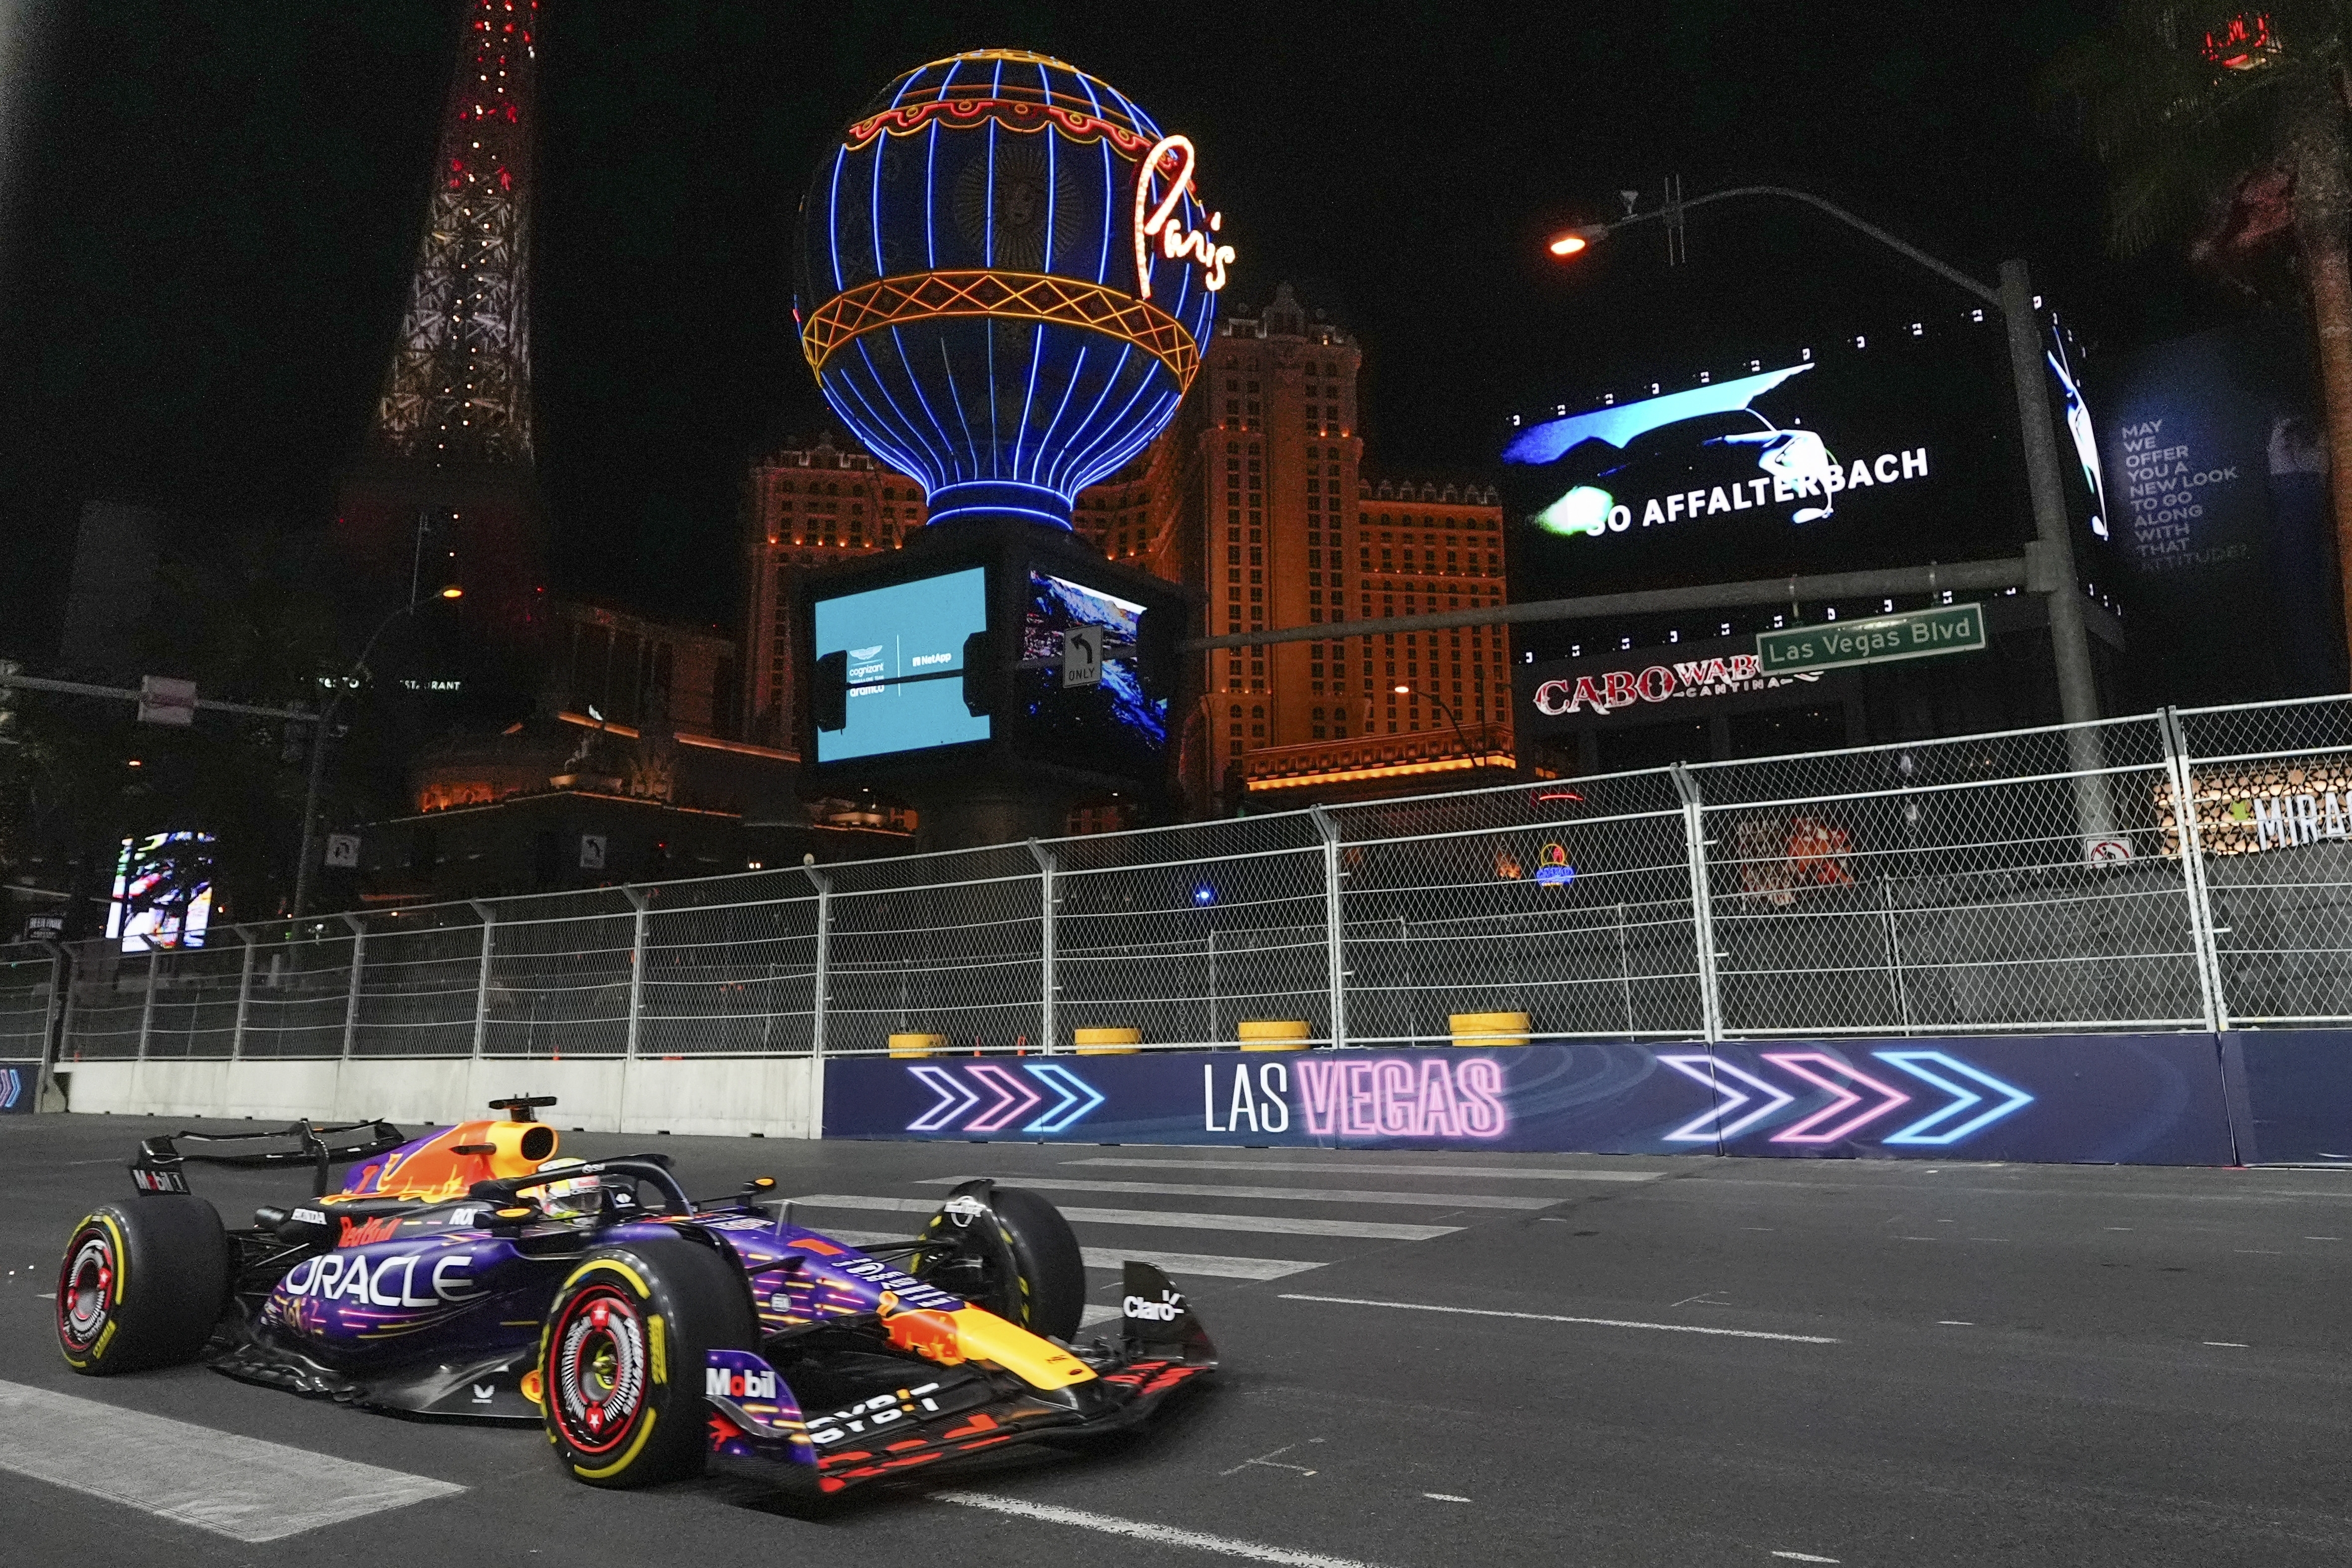 F1 Las Vegas 2023: A Quick Spin Round the Casino Capital